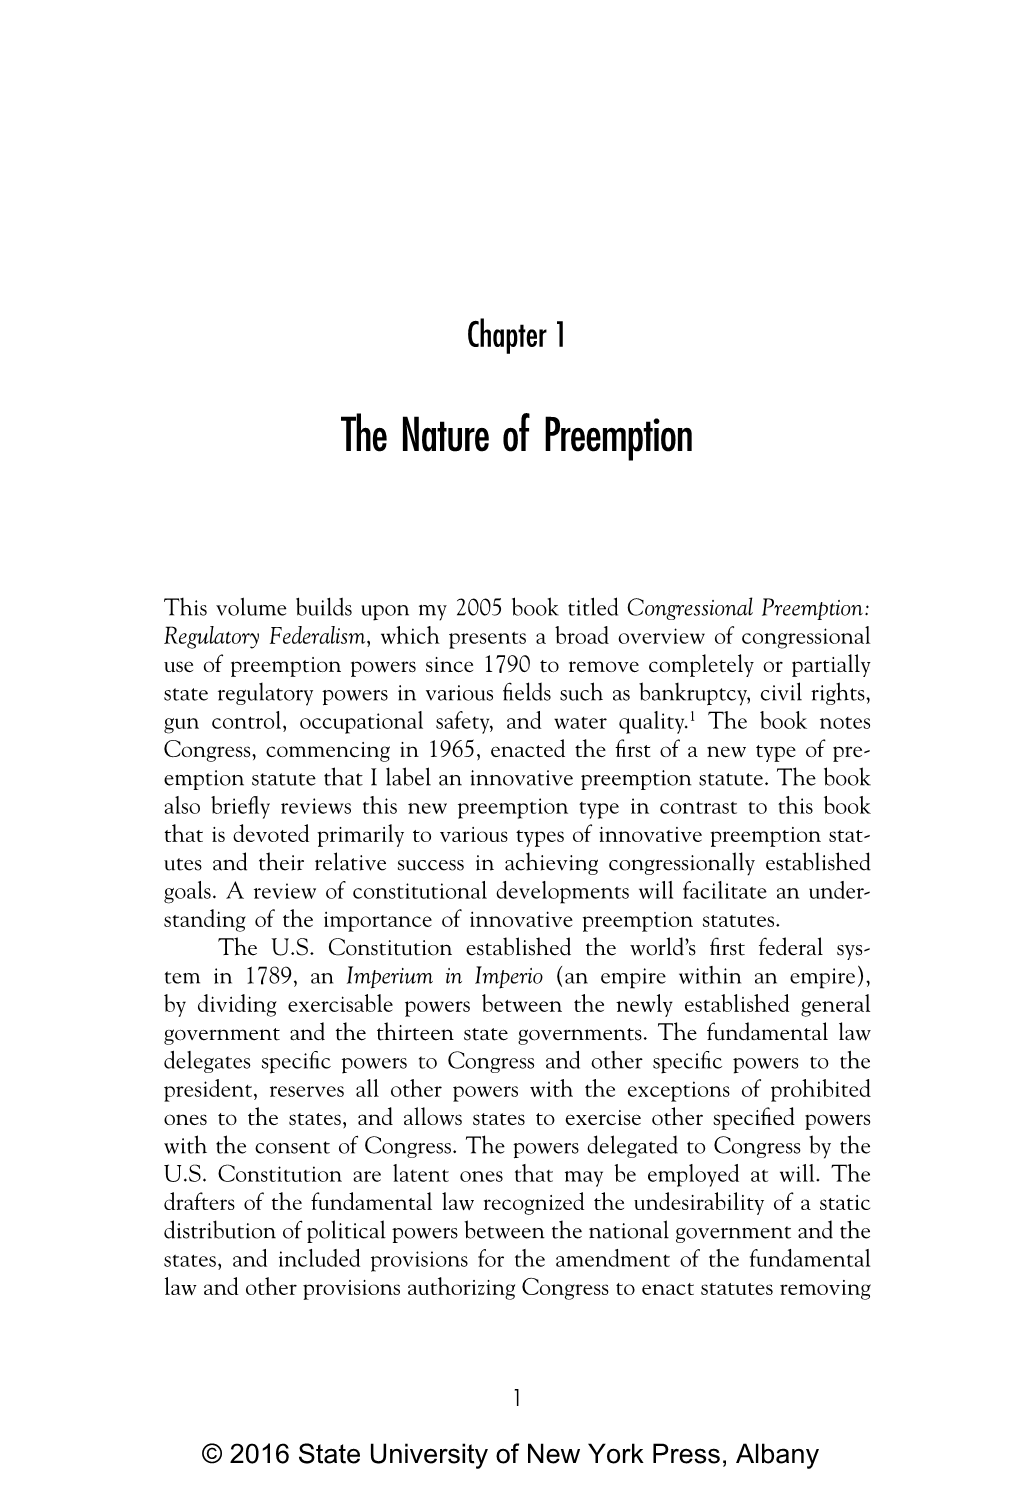 The Nature of Preemption